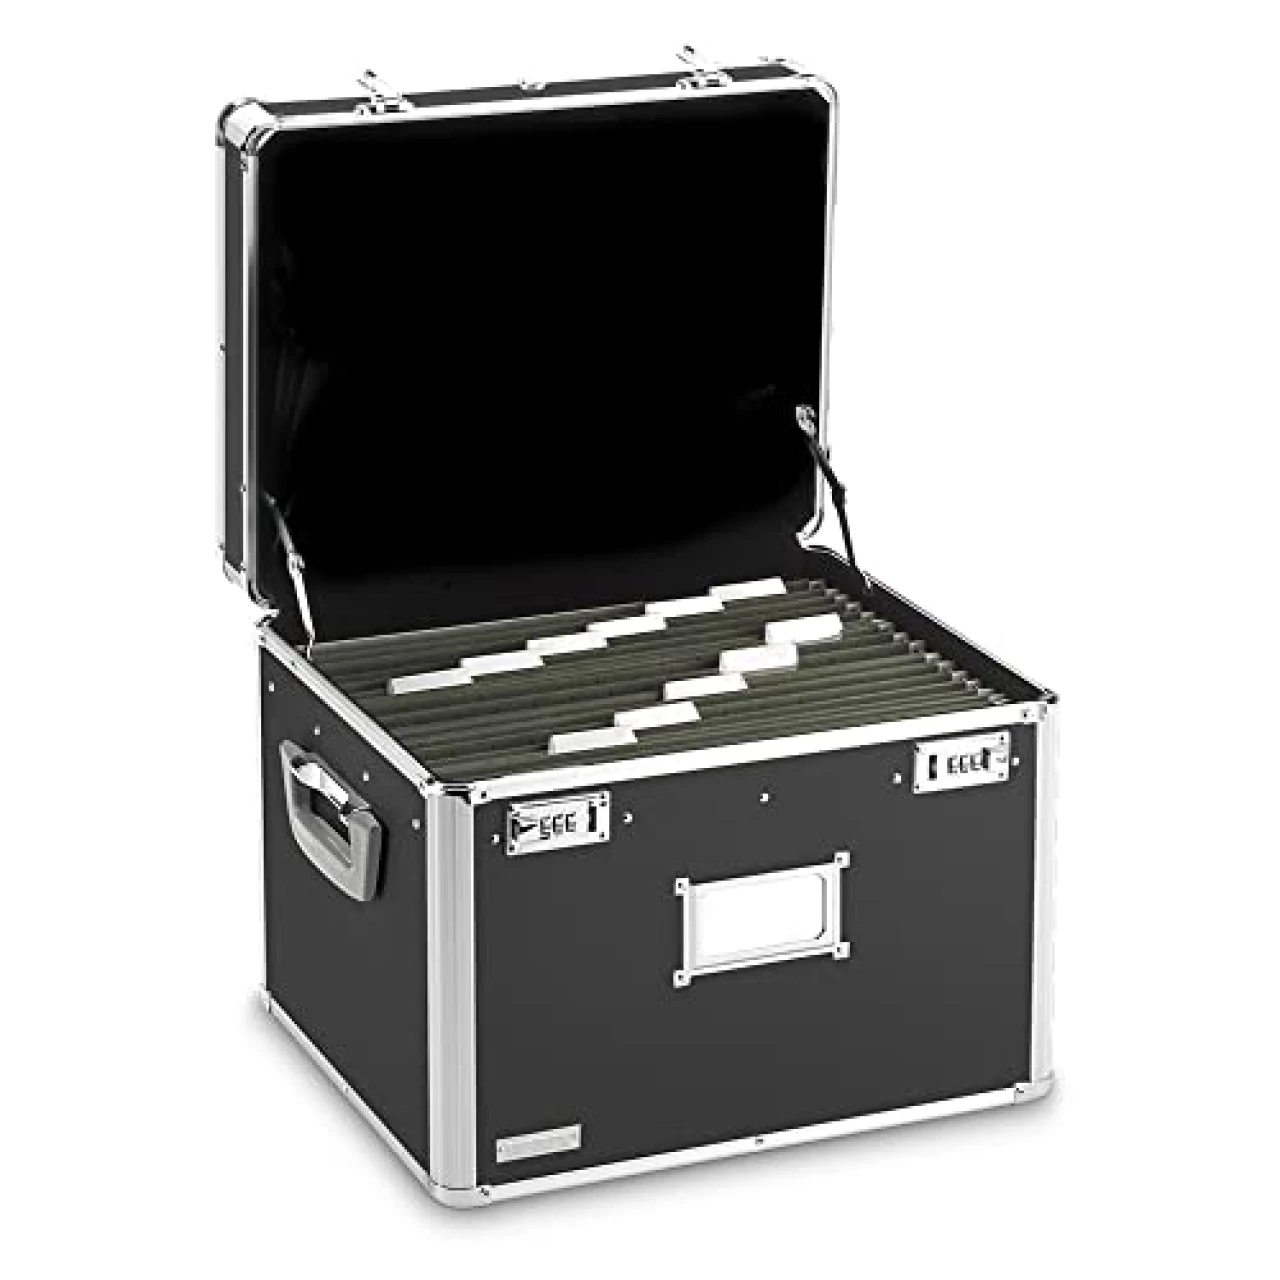 Vaultz Portable File Box - 17.5 x 14 x 12.5 Inch Legal/Letter Size Storage Box with Dual-Combination Locking